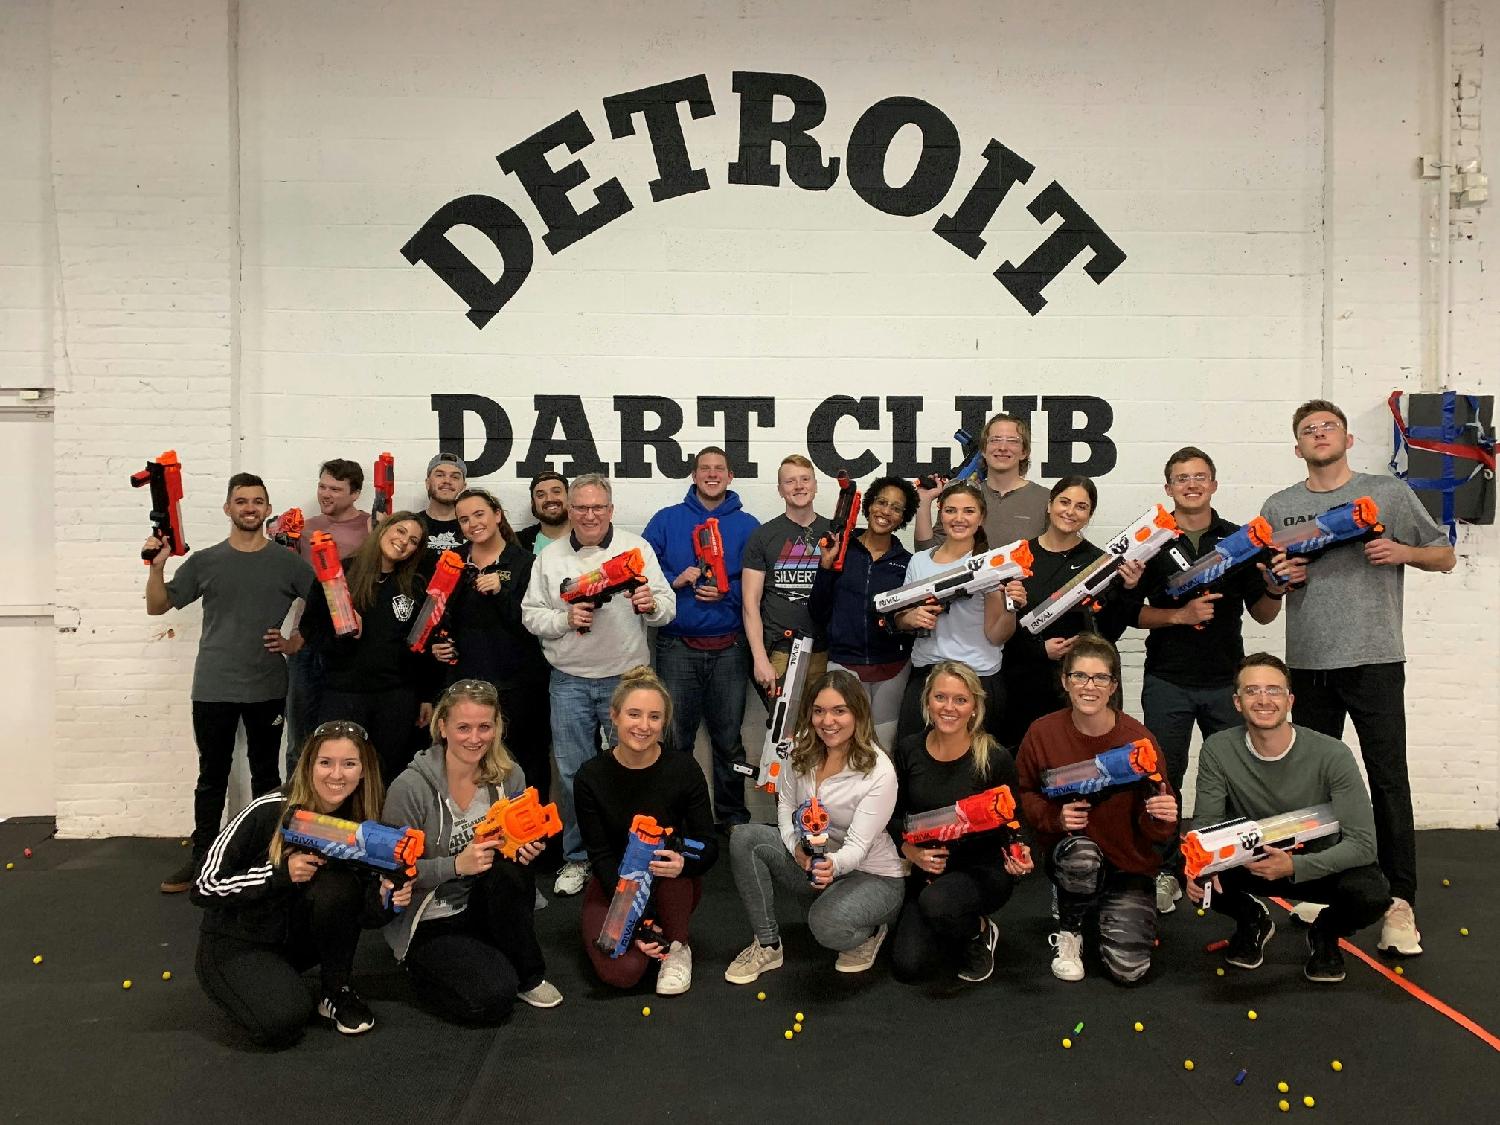 The Dart Club has become a mainstay for team outings since it opened.